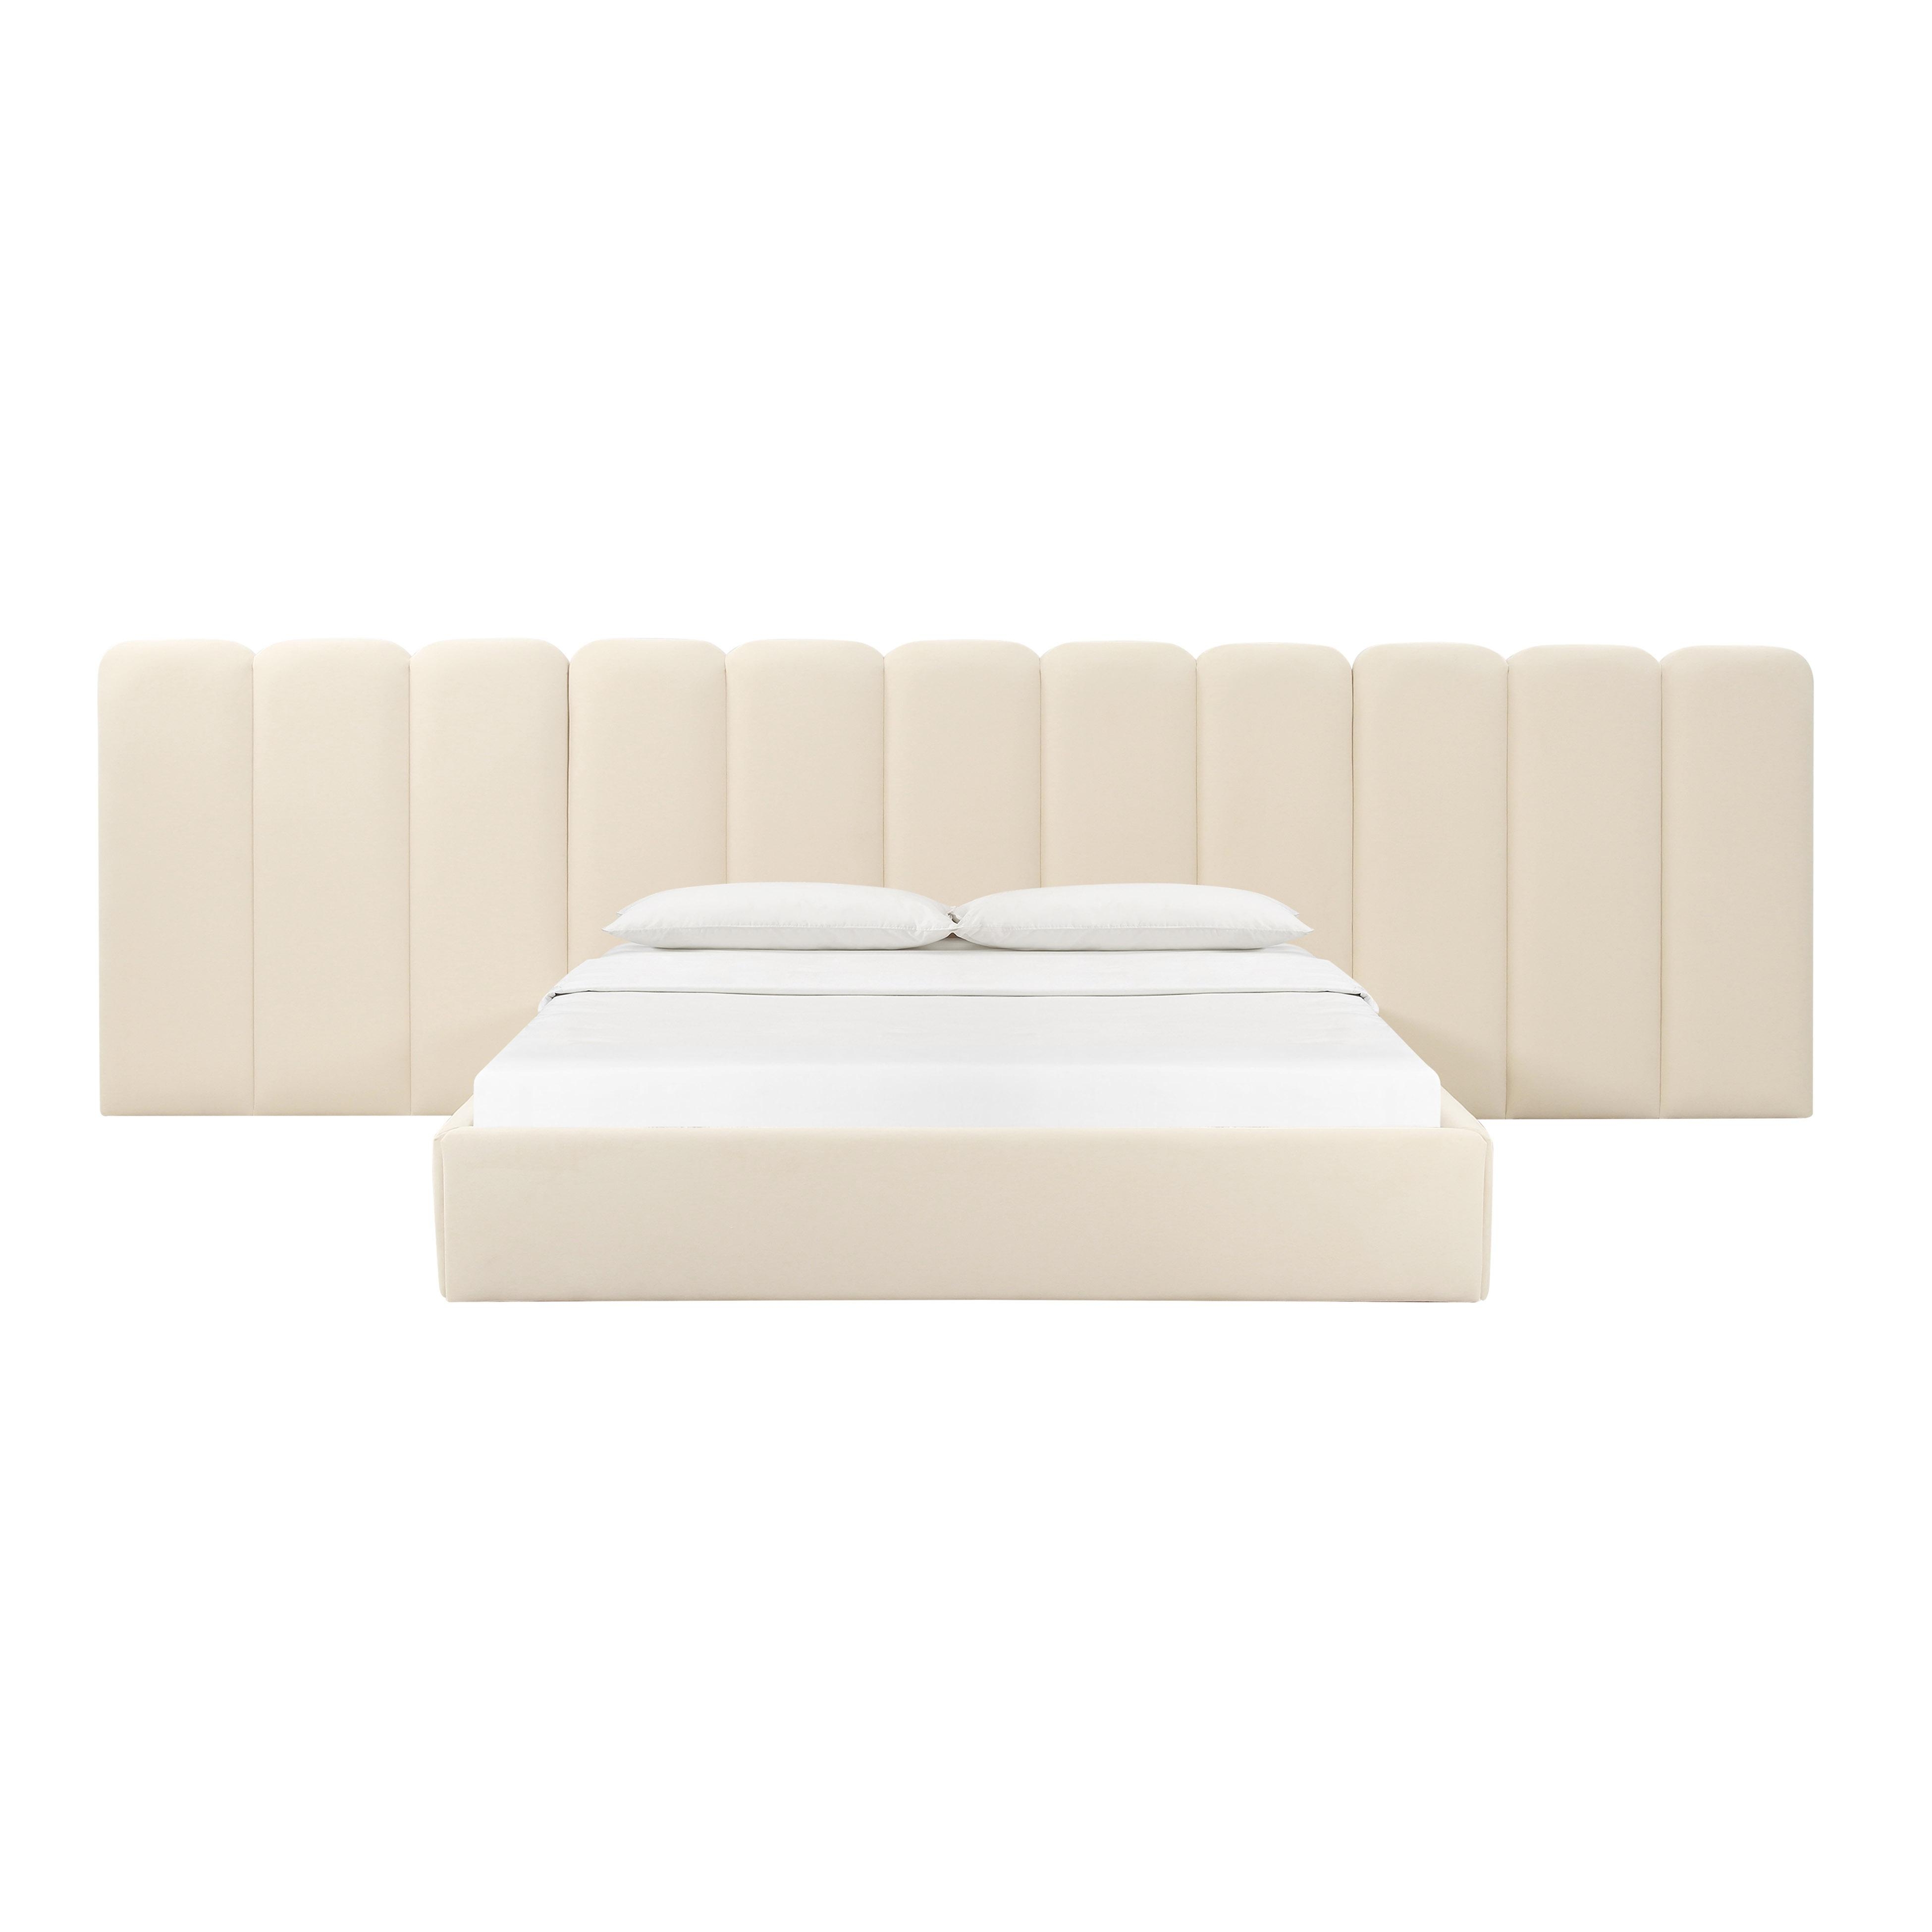 Palani Cream Velvet Queen Bed with Wings - Image 1